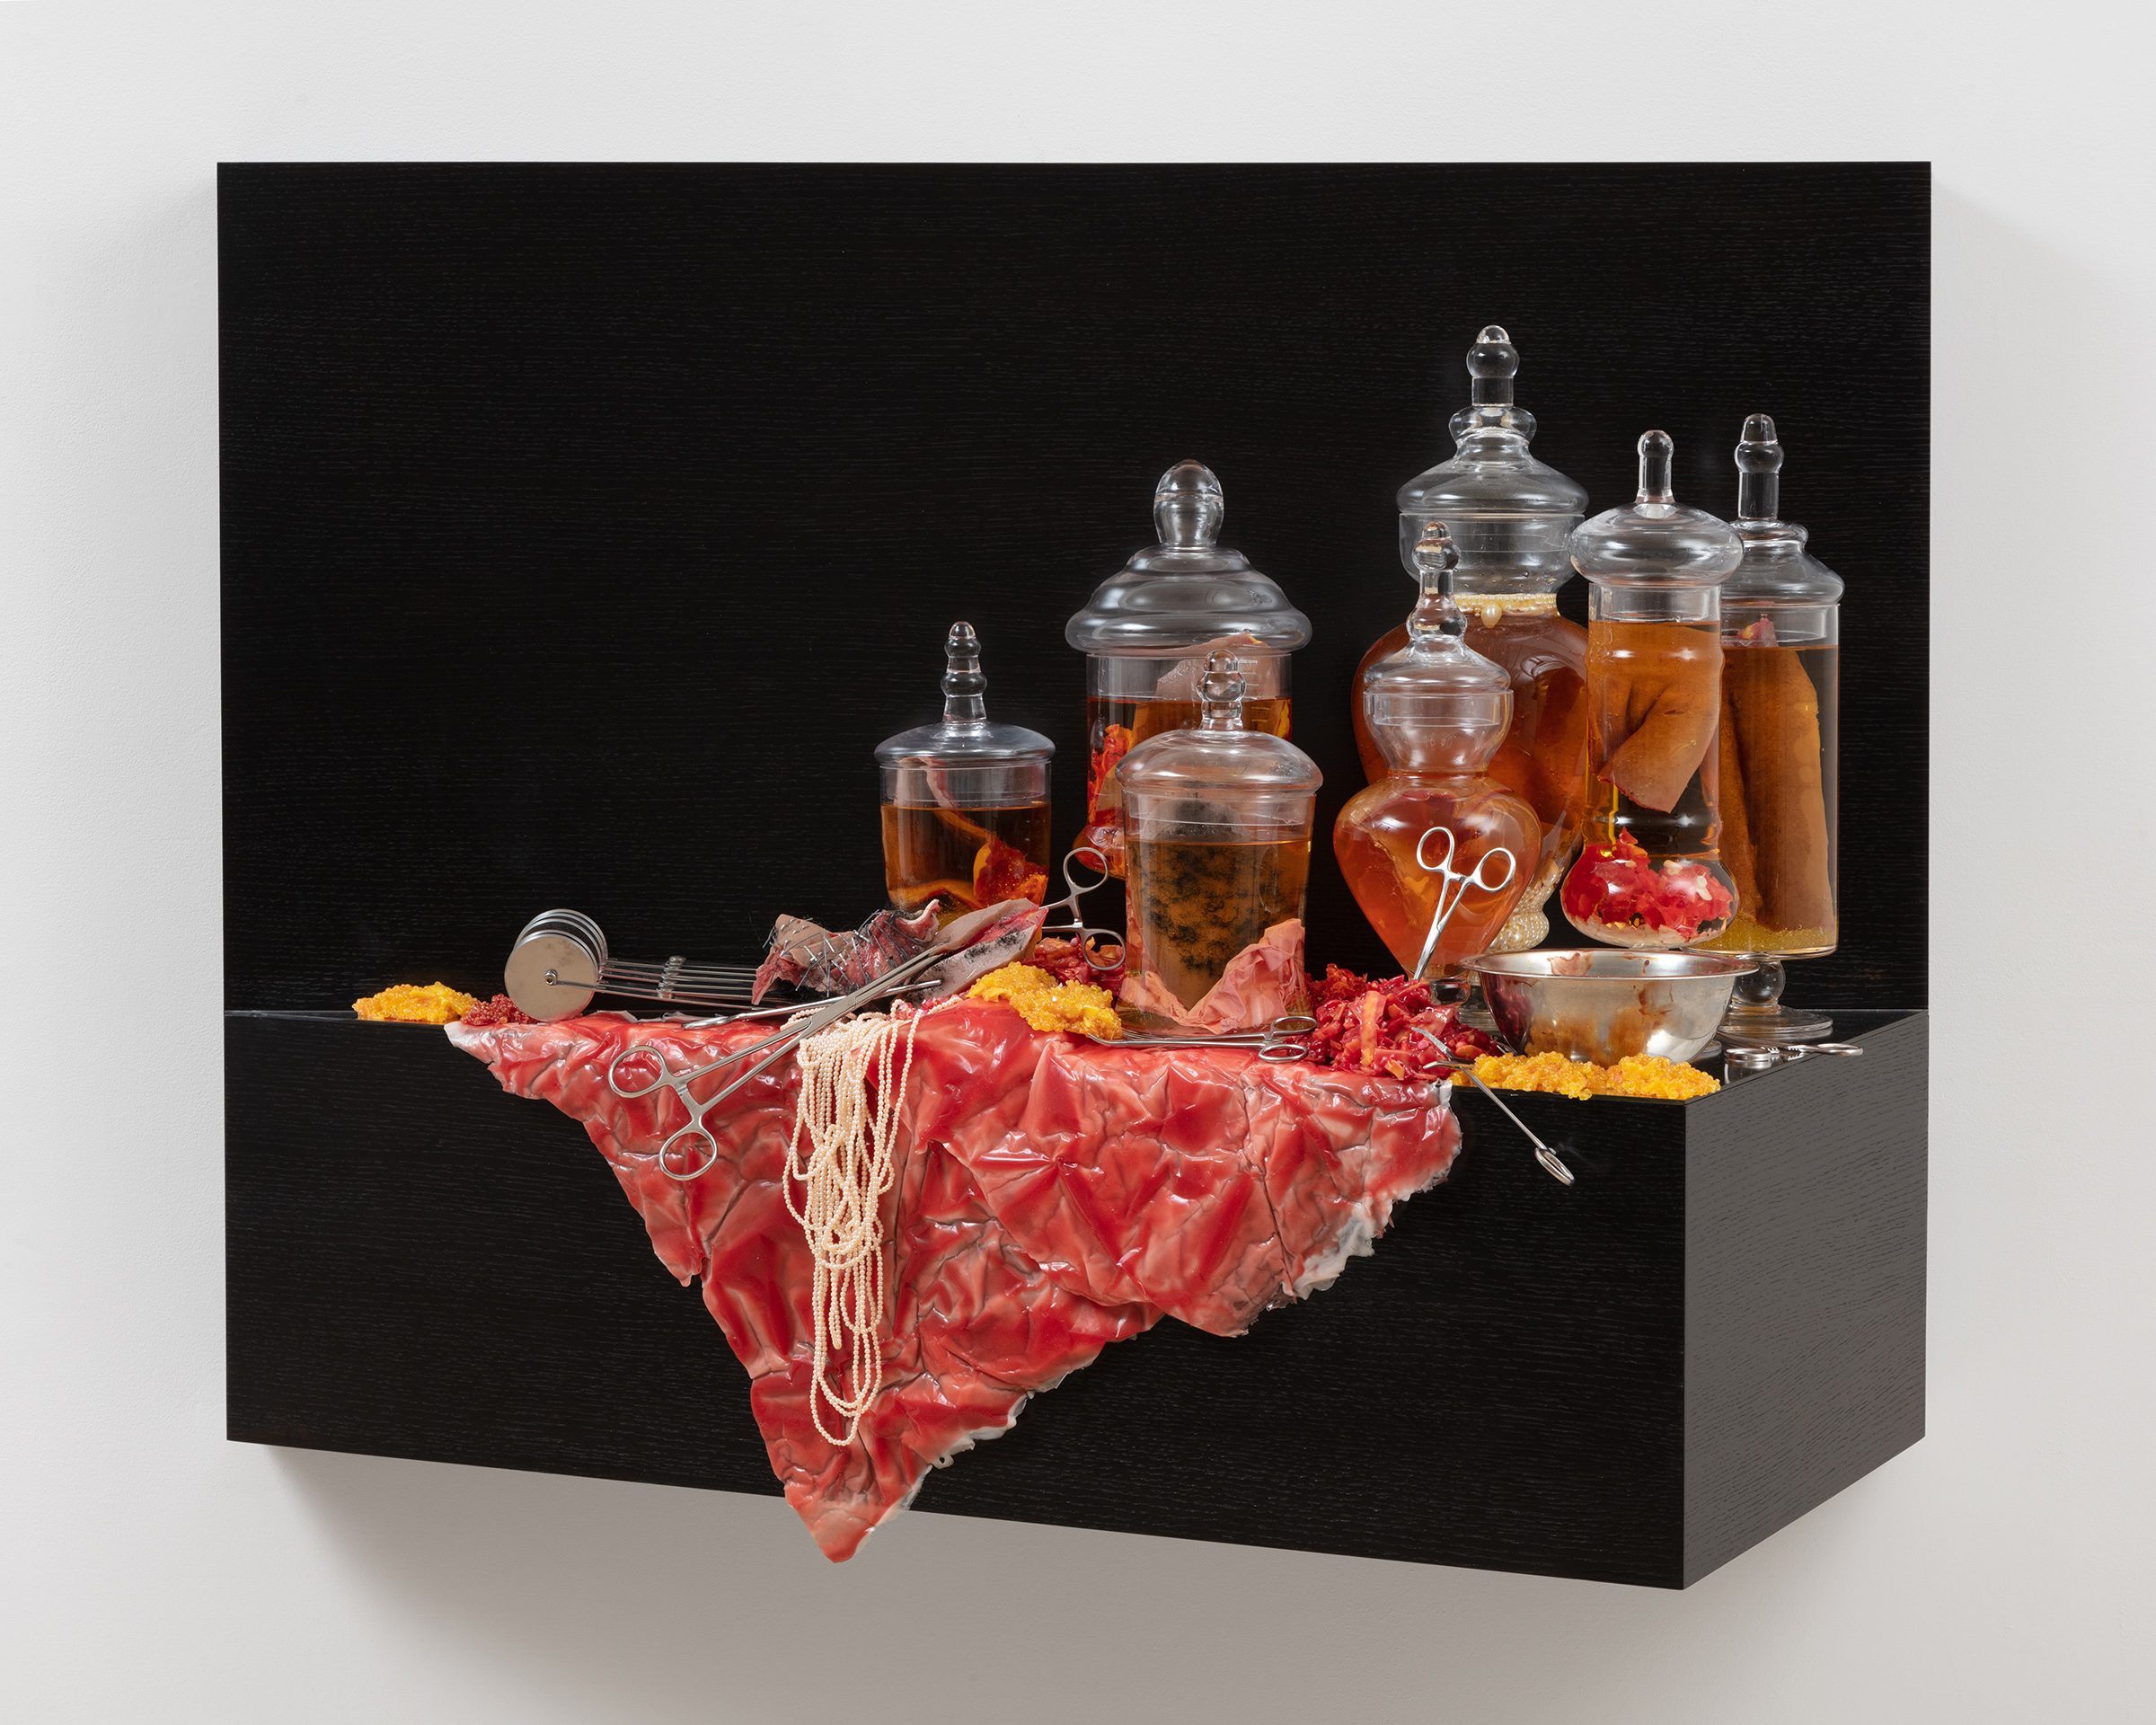 A black shelf with surgical instruments and seven glass jars containing tissue-like substances submerged in liquid. A triangle of fleshy material and a strand of pearls drape over the side.